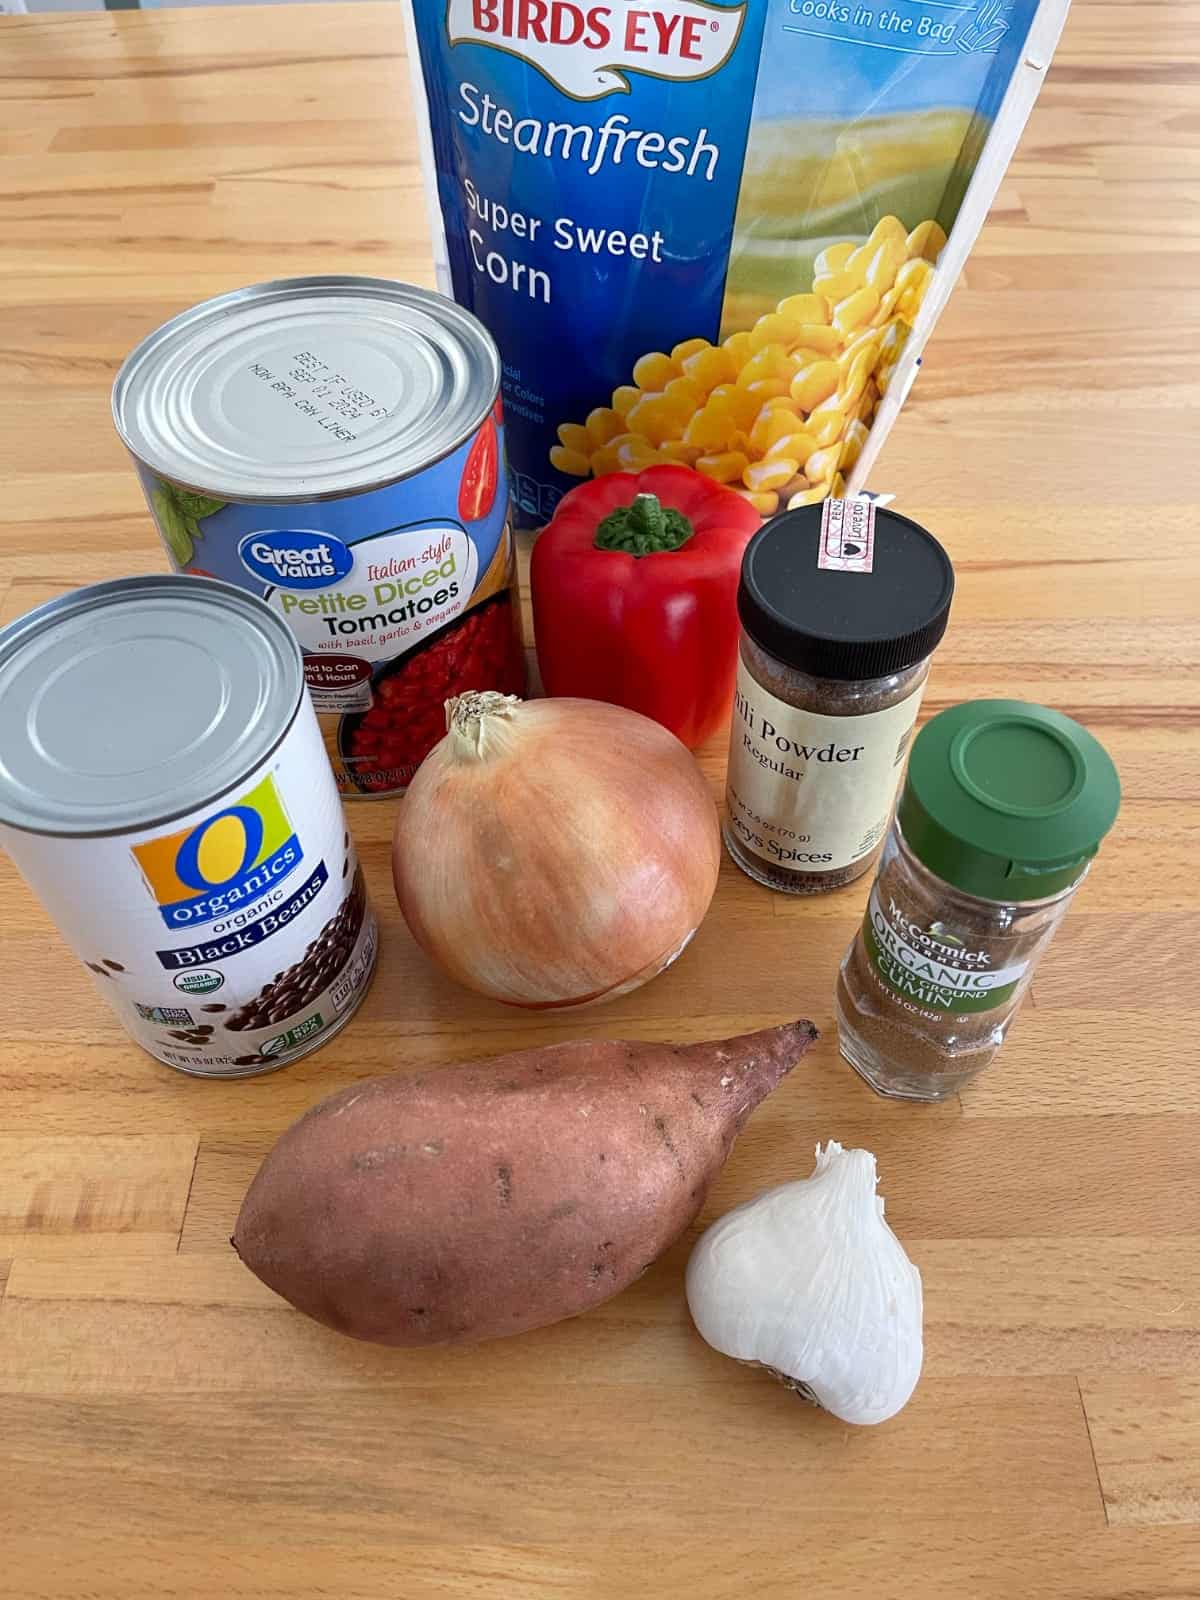 Ingredients for making chili, including sweet potato, onion, garlic, corn, black beans, diced tomatoes, bell pepper and chili powder.